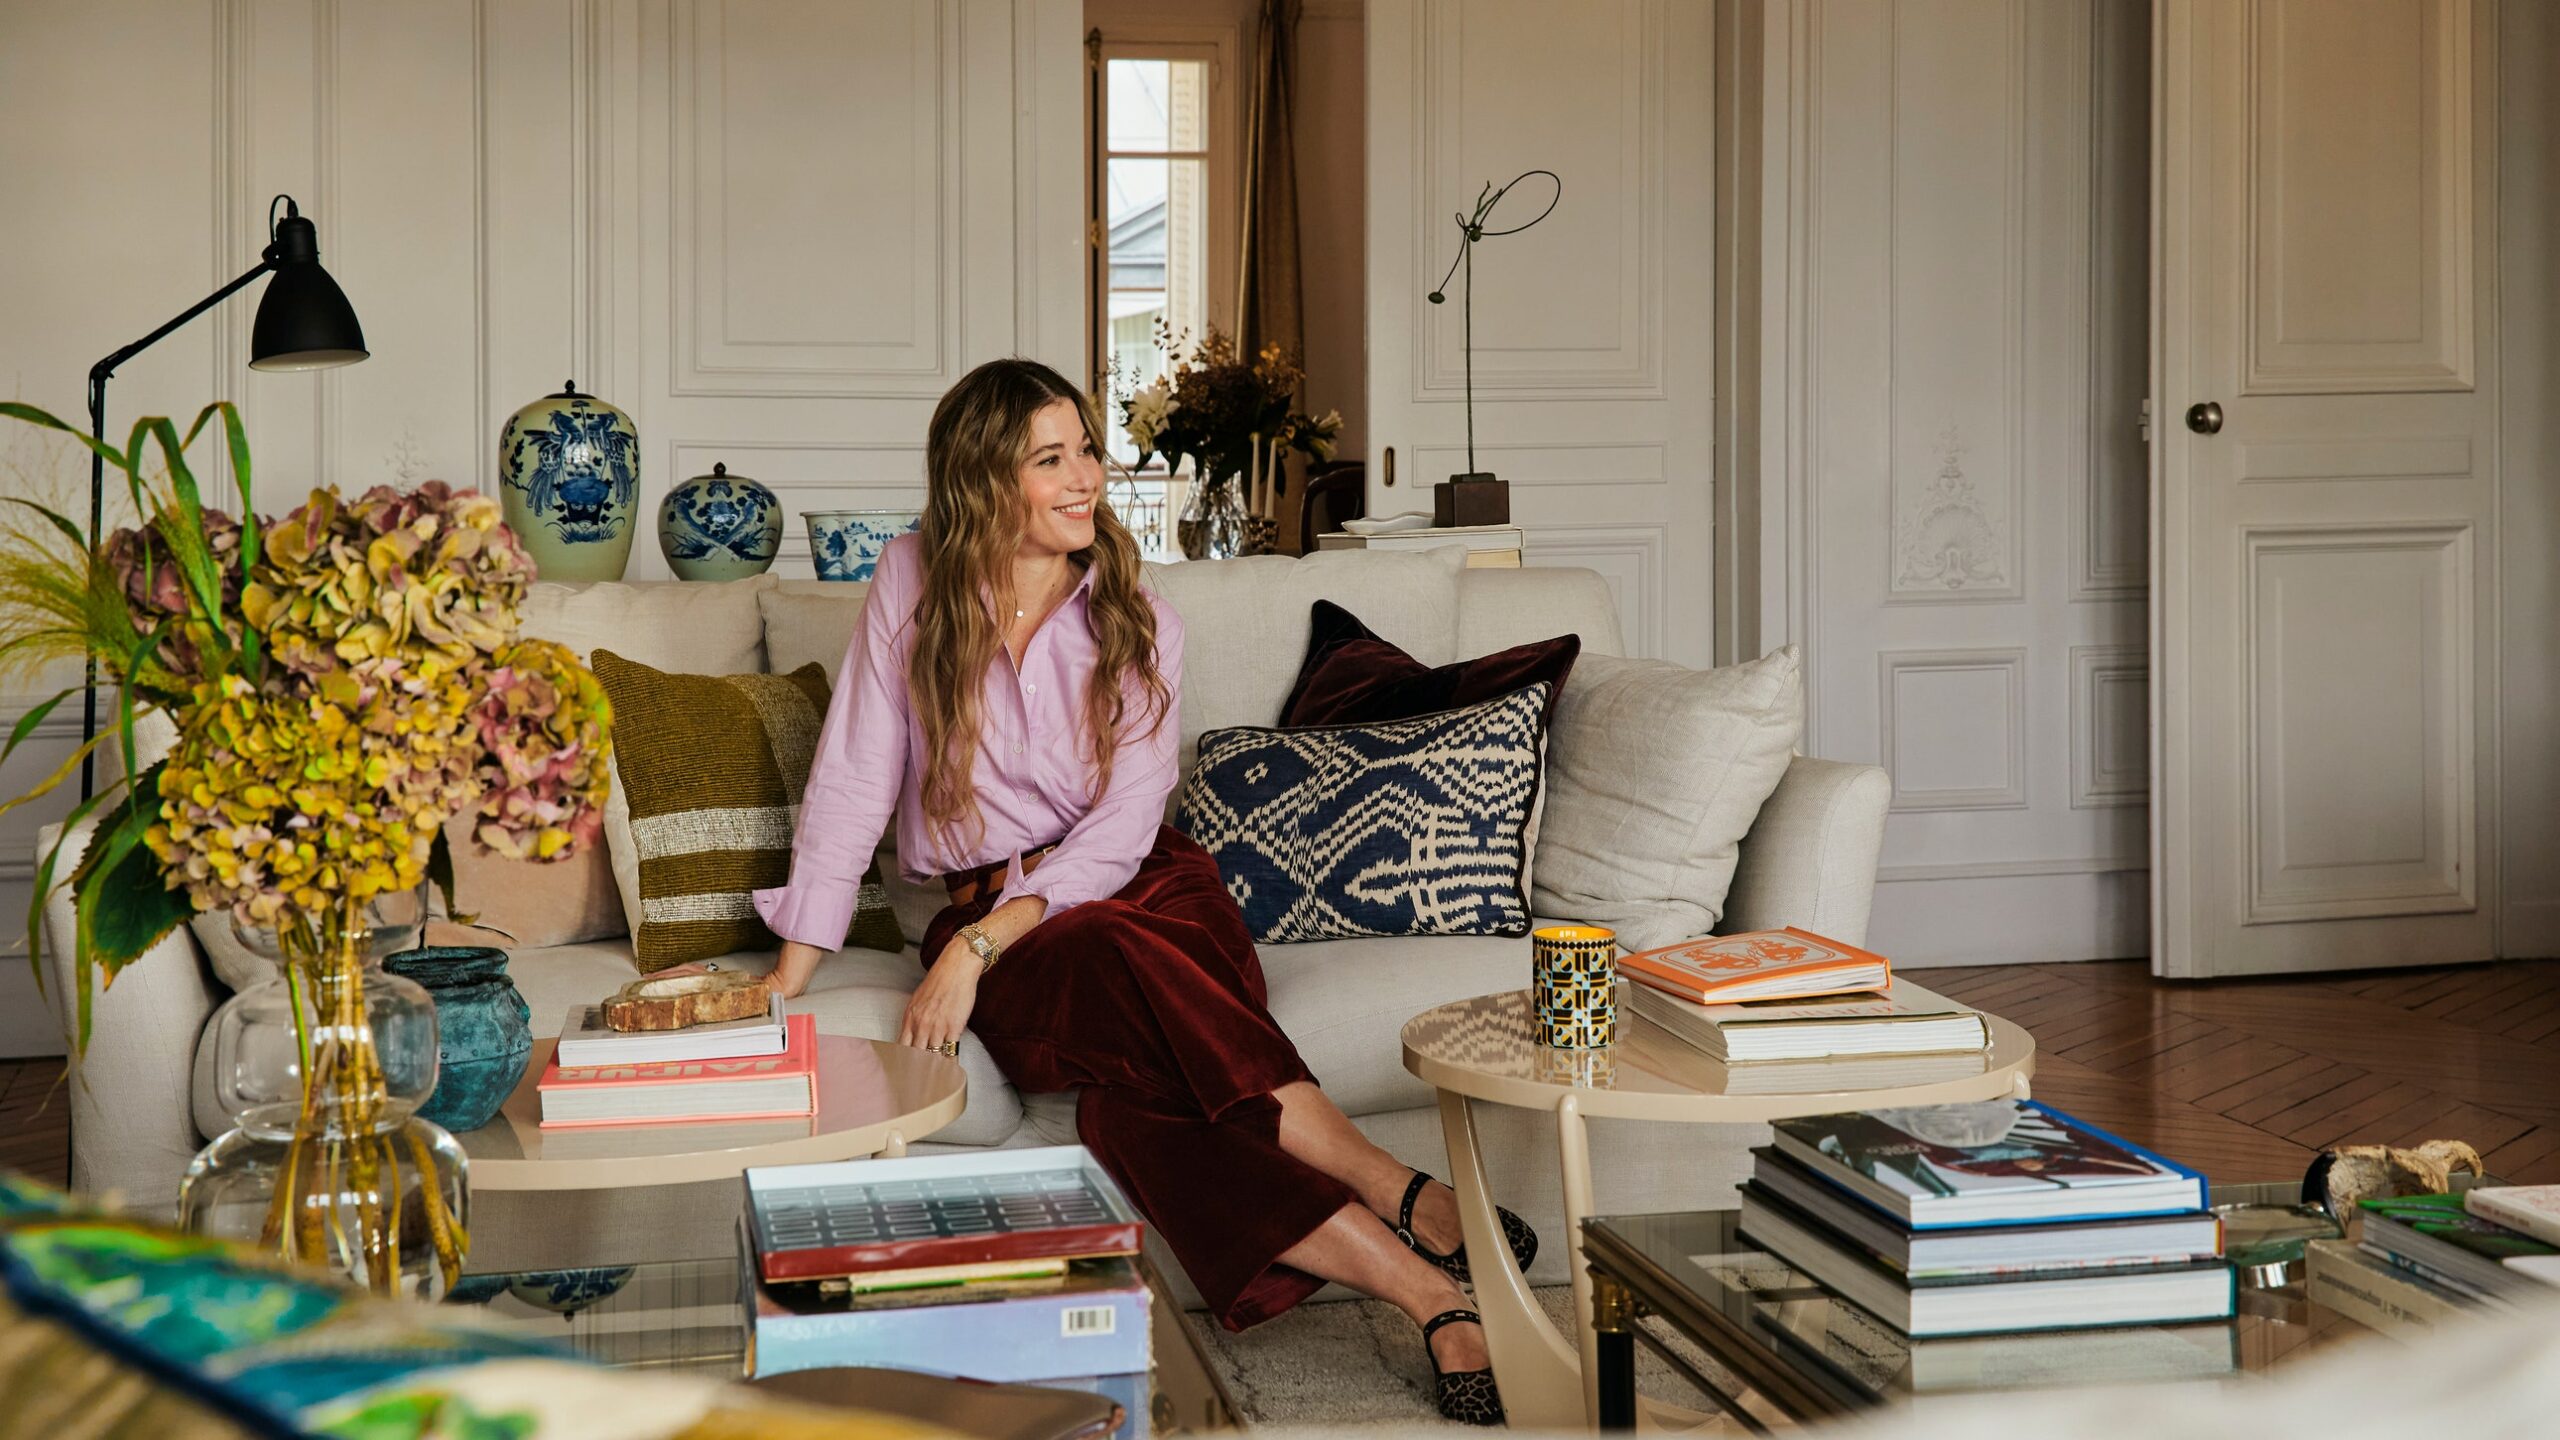 In the Parisian residence of Ines De Cominges